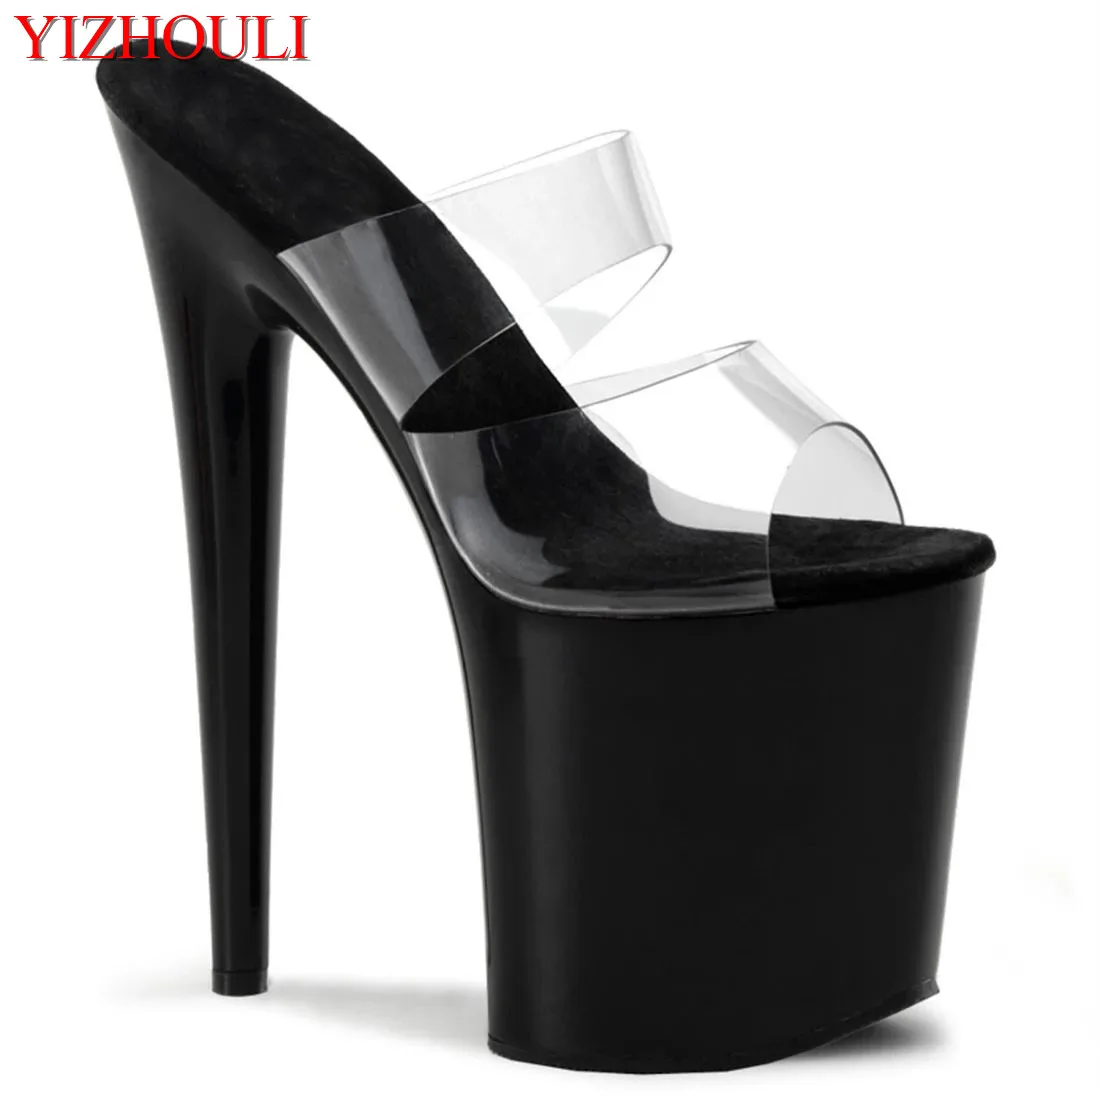 Sexy 8 inch heels.Summer 20cm slipper, lacquered soles transparent vamp, party shoe club, pole dancing shoes